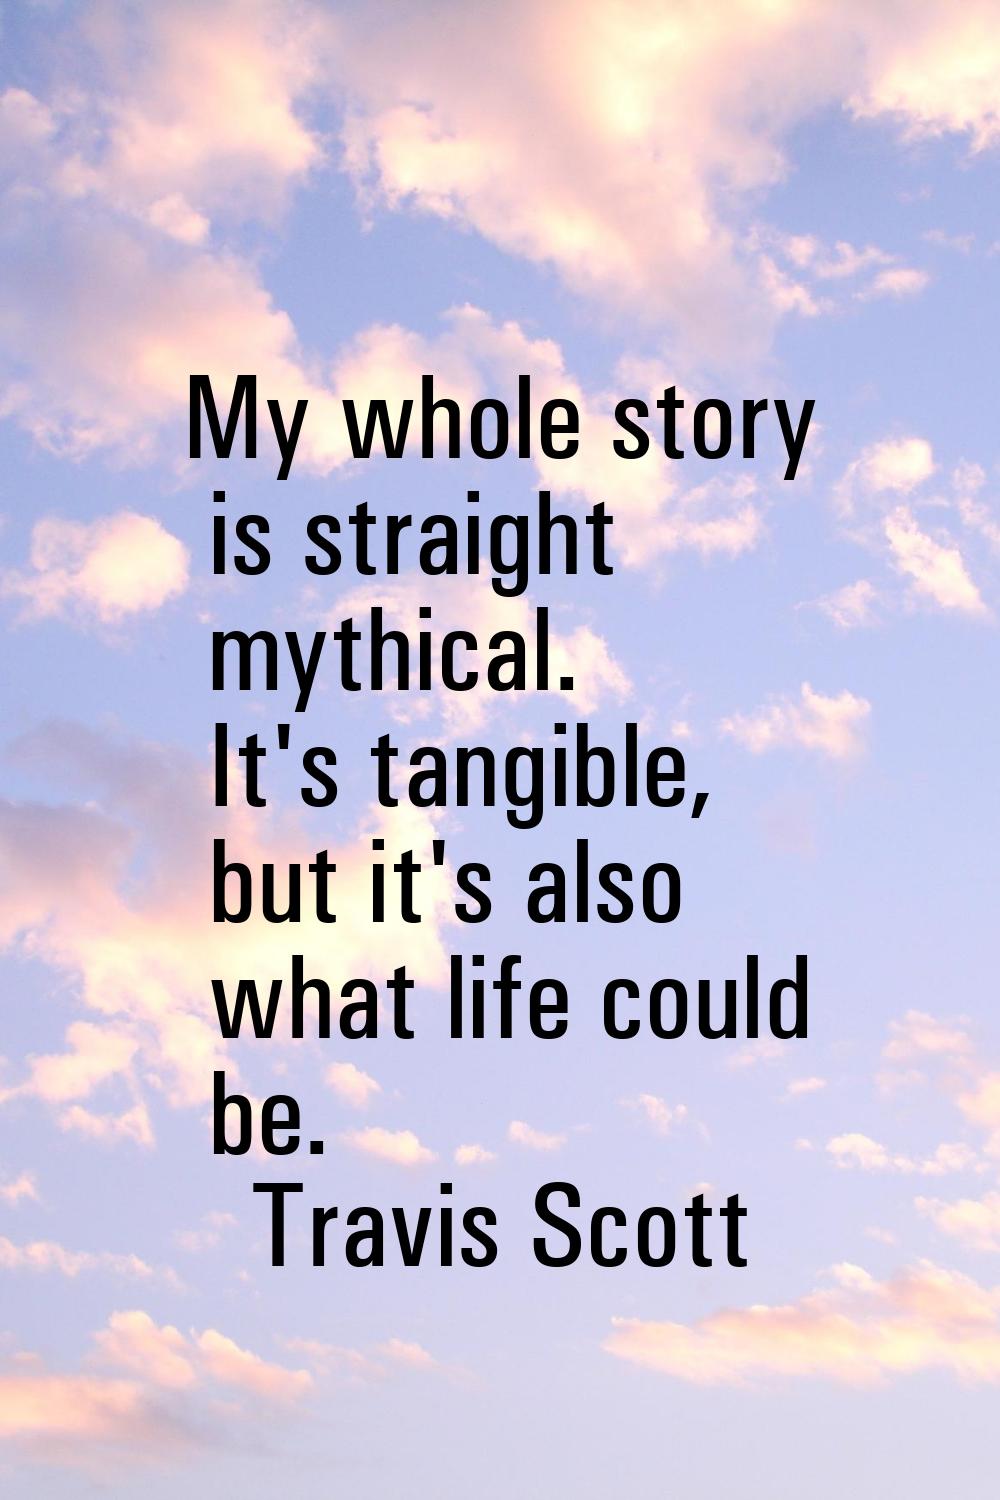 My whole story is straight mythical. It's tangible, but it's also what life could be.